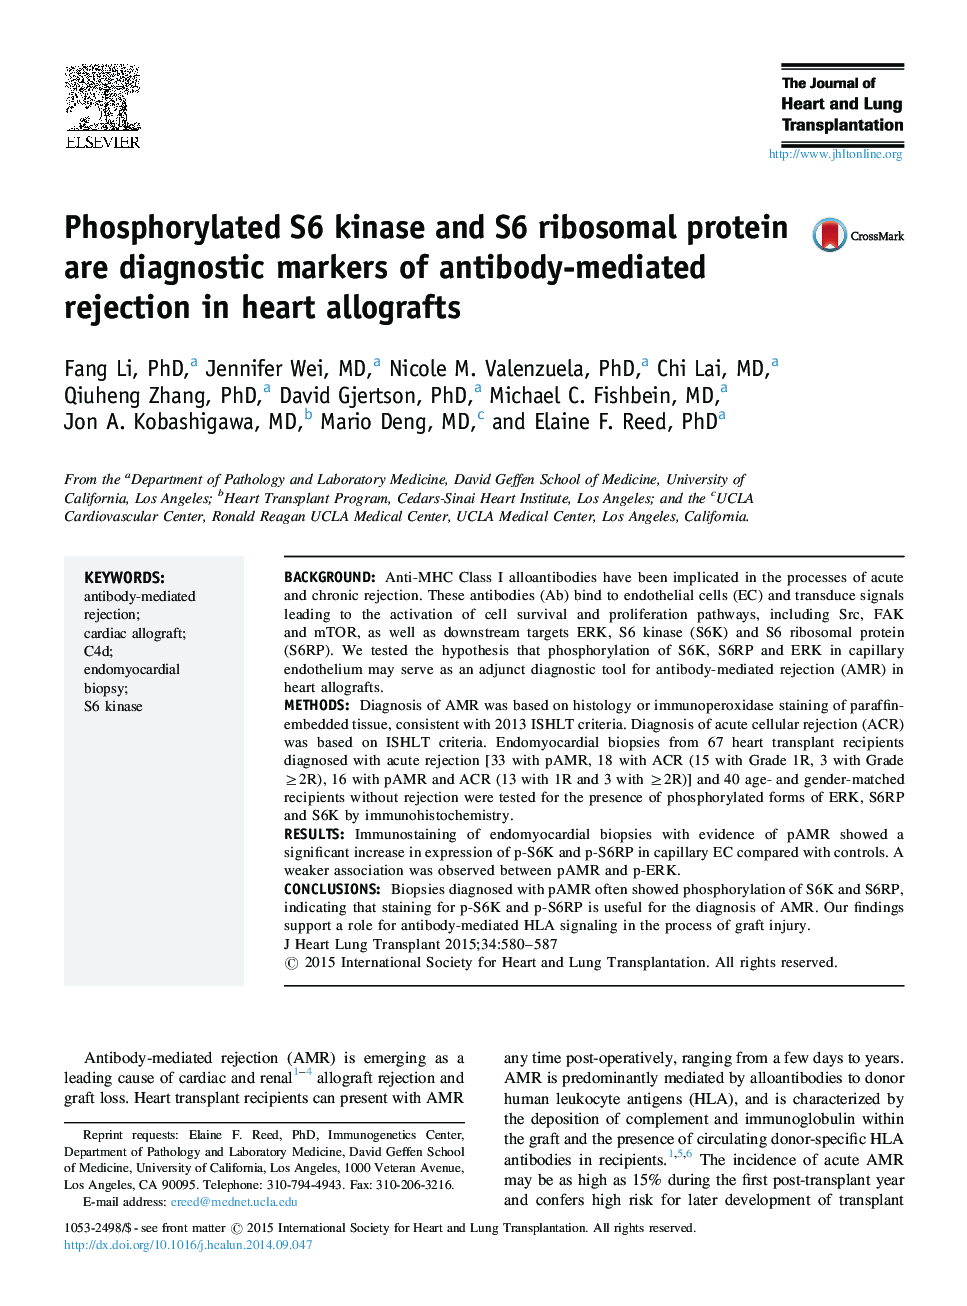 Phosphorylated S6 kinase and S6 ribosomal protein are diagnostic markers of antibody-mediated rejection in heart allografts